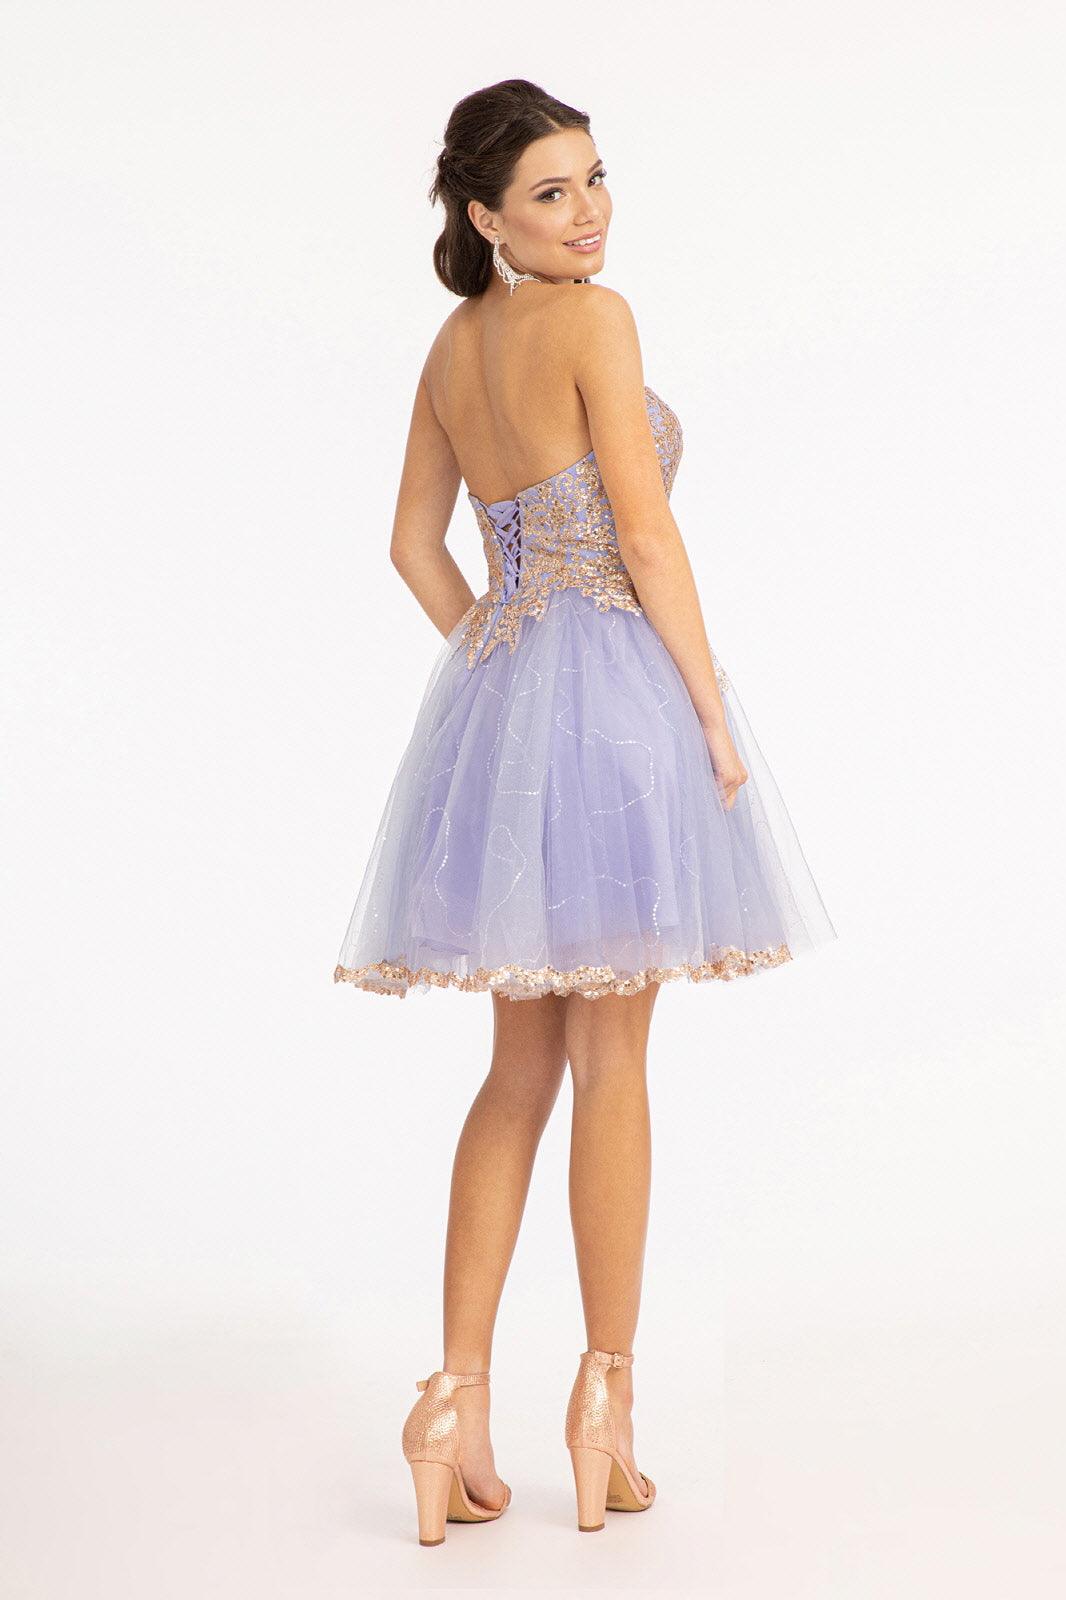 Strapless Homecoming Short Dress Sale - The Dress Outlet